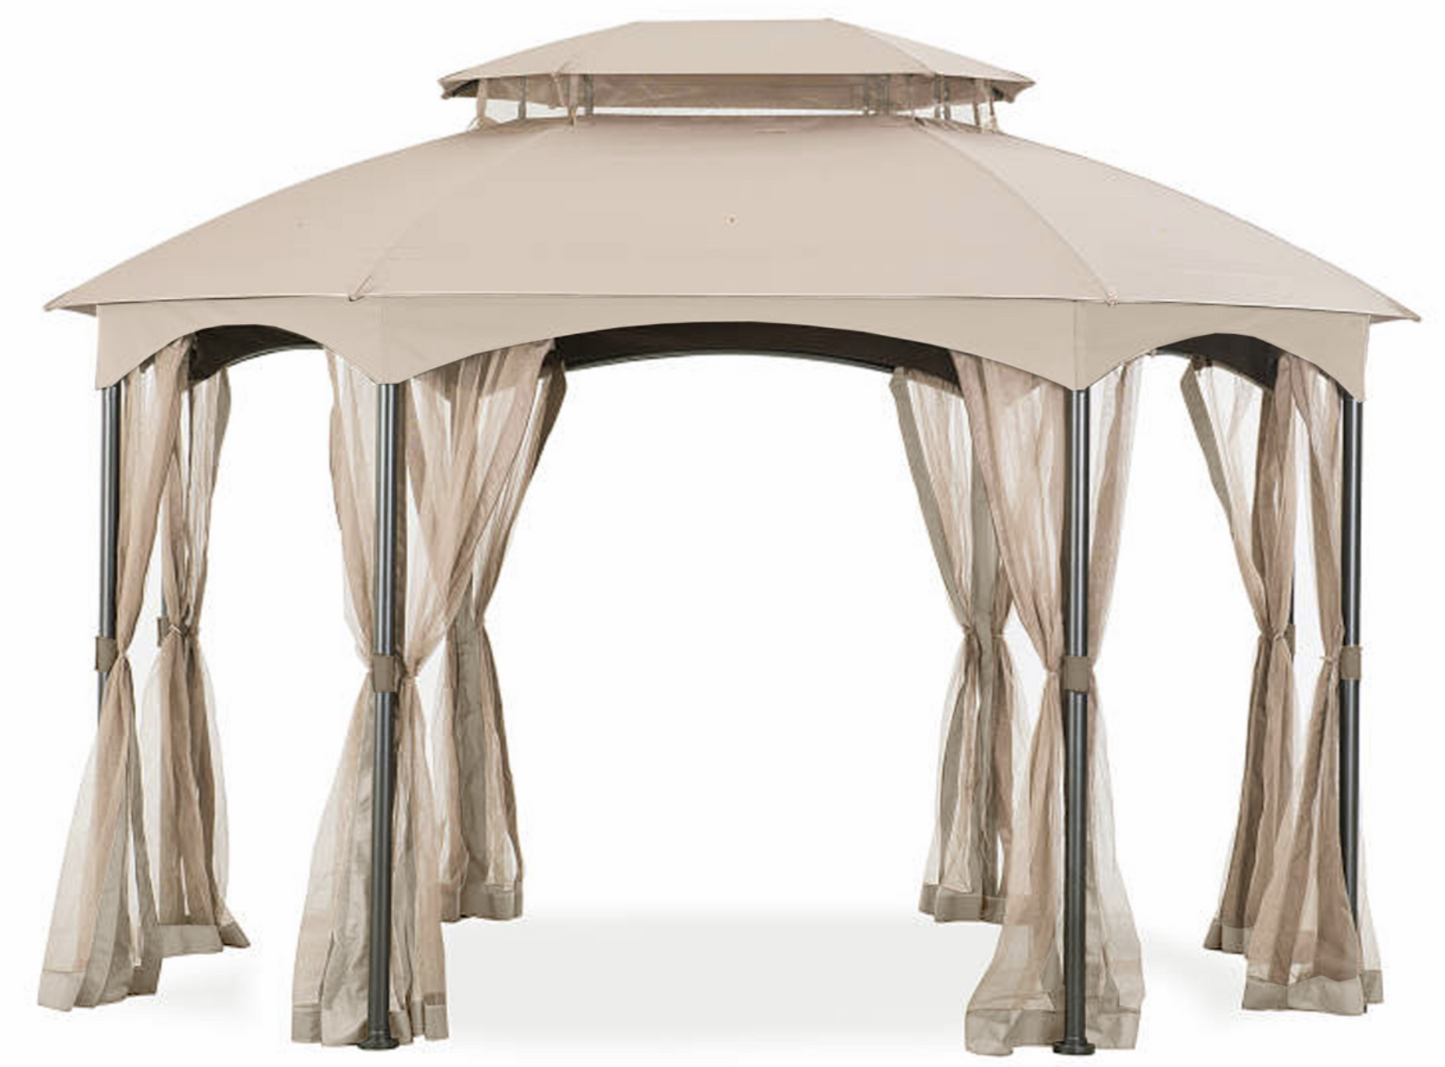 Replacement Canopy and netting for The Manhattan Oval Gazebo - RIPLOCK 350 - Beige